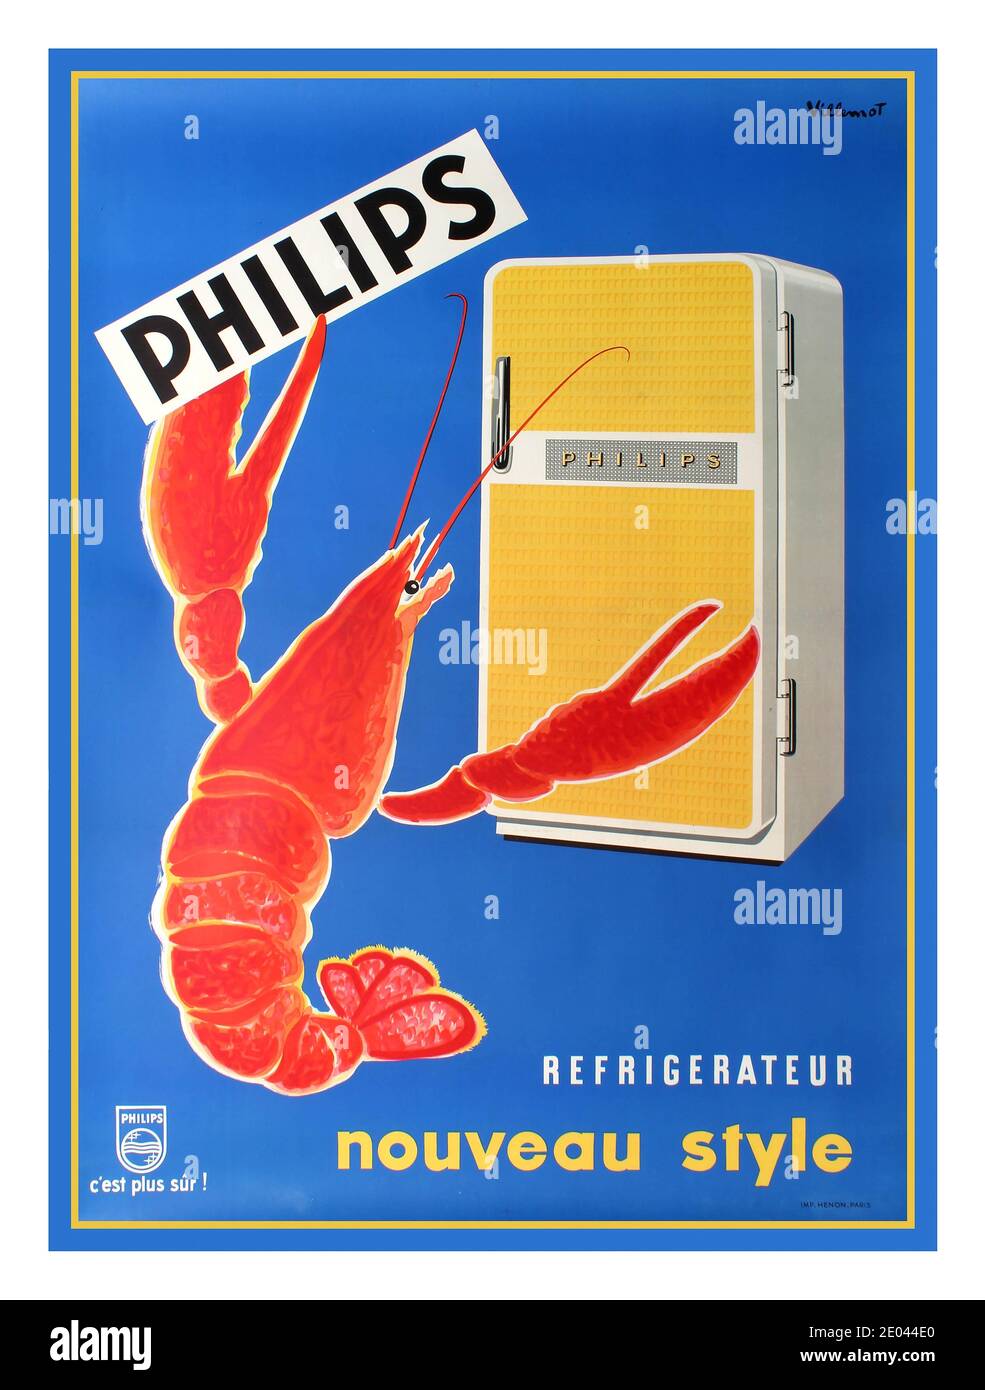 Vintage 1950’s  French advertising poster for new fridges manufactured by Philips: Refrigerateur Nouveau Style - Philips c'est plus sur! design by notable French graphic artist Bernard Villemot (1911-1989) showing a giant lobster standing up in front of a brand new yellow and white Philips fridge while holding a Philips sign in his claw. Printed by Imp. Henon, Paris. Bernard Villemot (1911 – 1989) was a French graphic artist known primarily for his iconic advertising images for He was known for an artistic vision that was influenced by photographic montage. Stock Photo